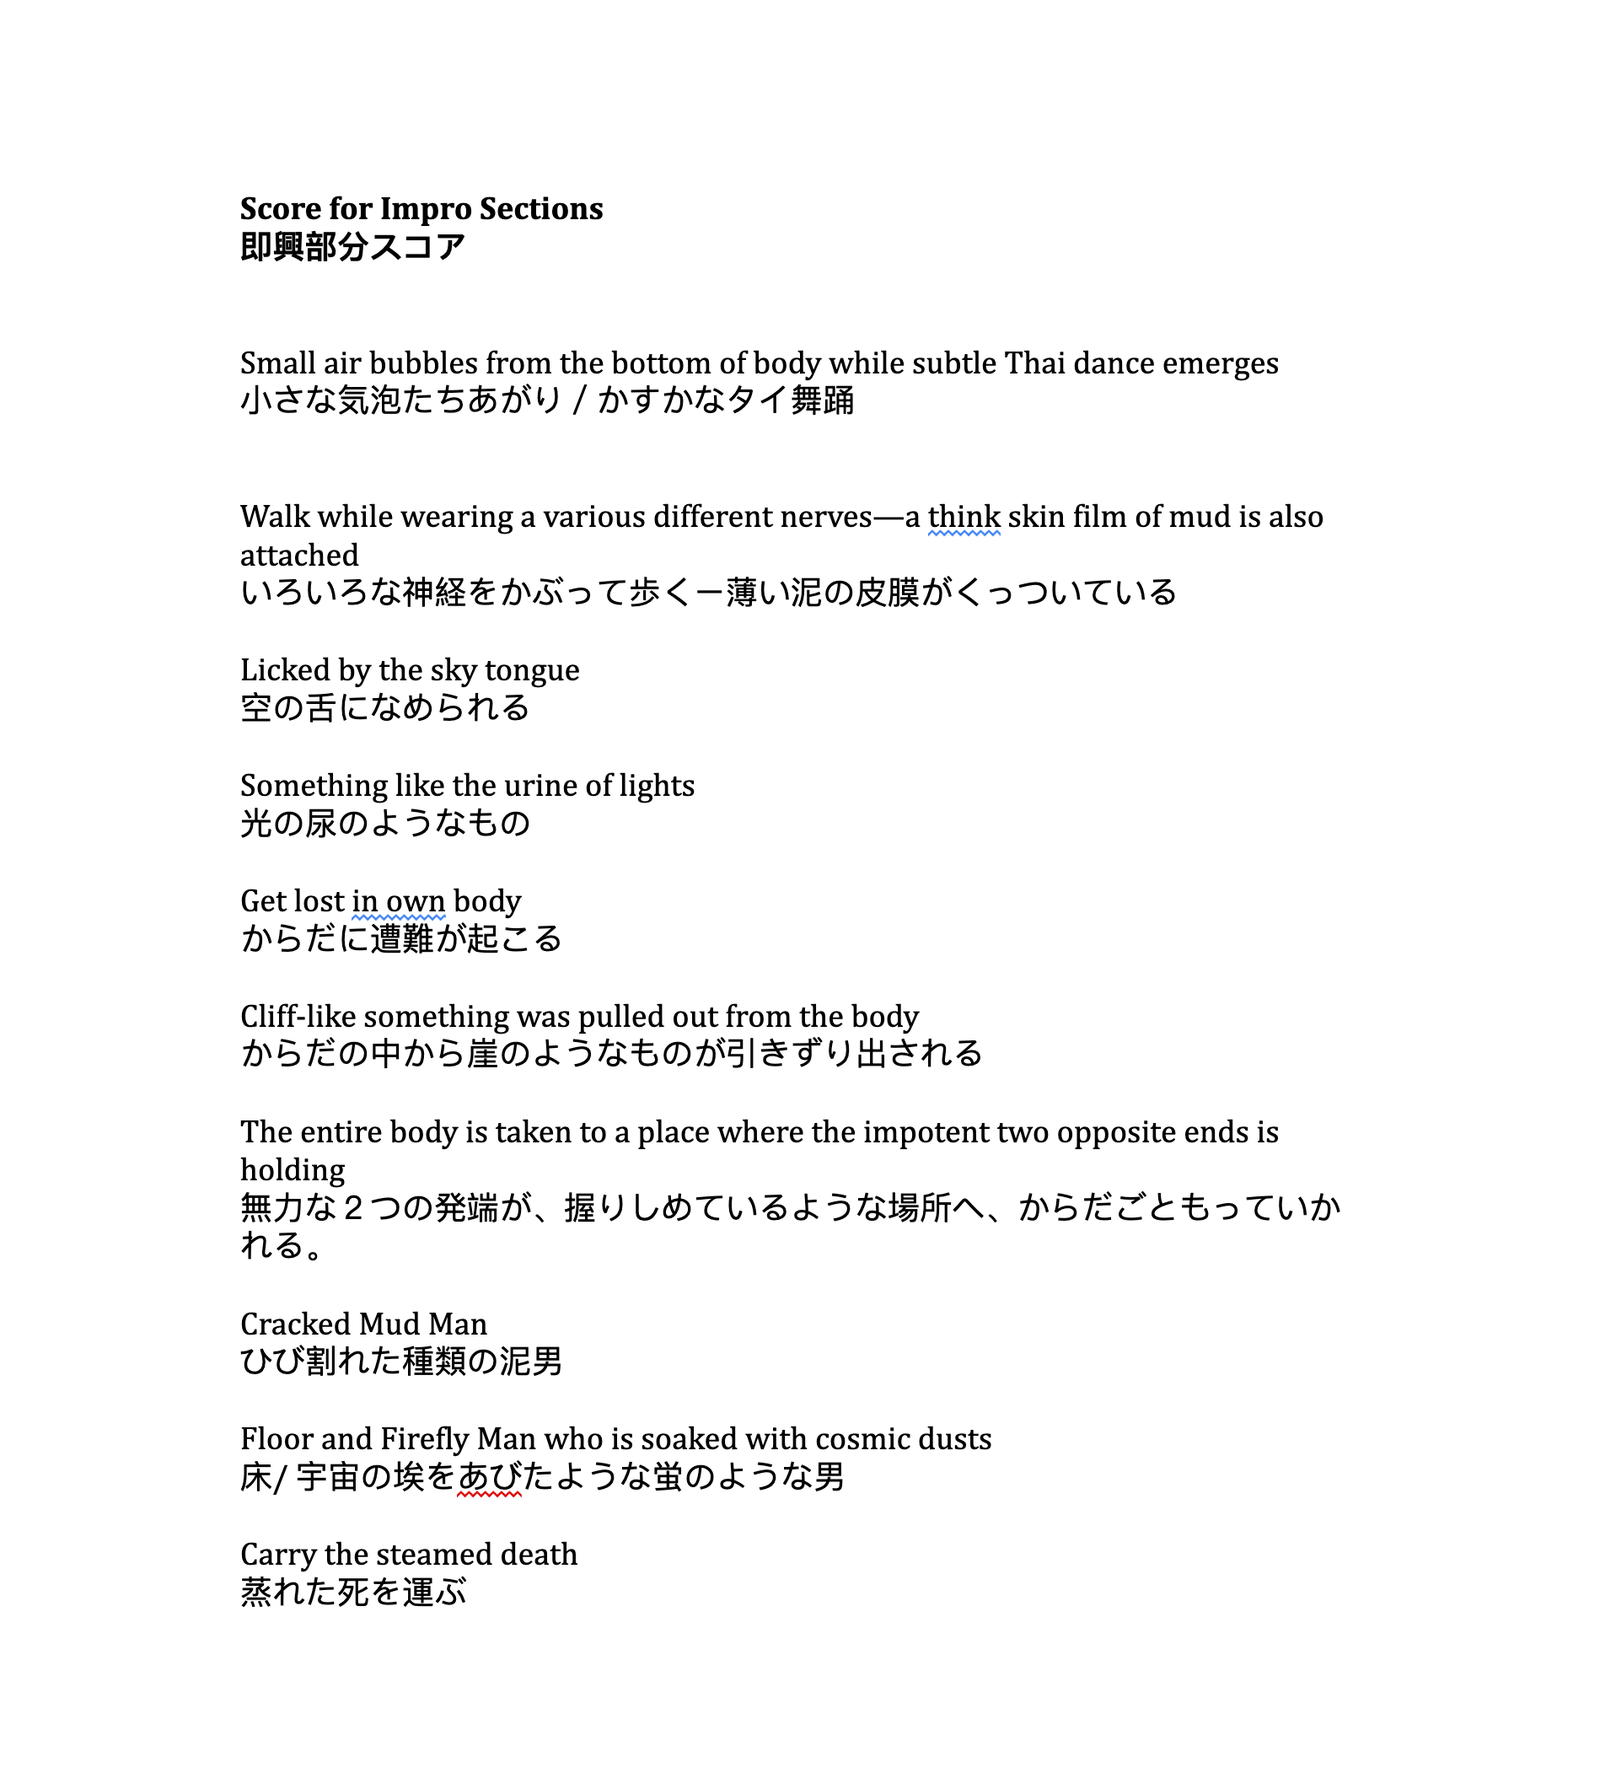 A text document in both English and Japanese is titled “Score for Impro Sessions” by Mina Nishimura. The document contains a list of evocative phrases such as, “Licked by the sky tongue,” “Something like the urine of lights,” and “Get lost in own body.”